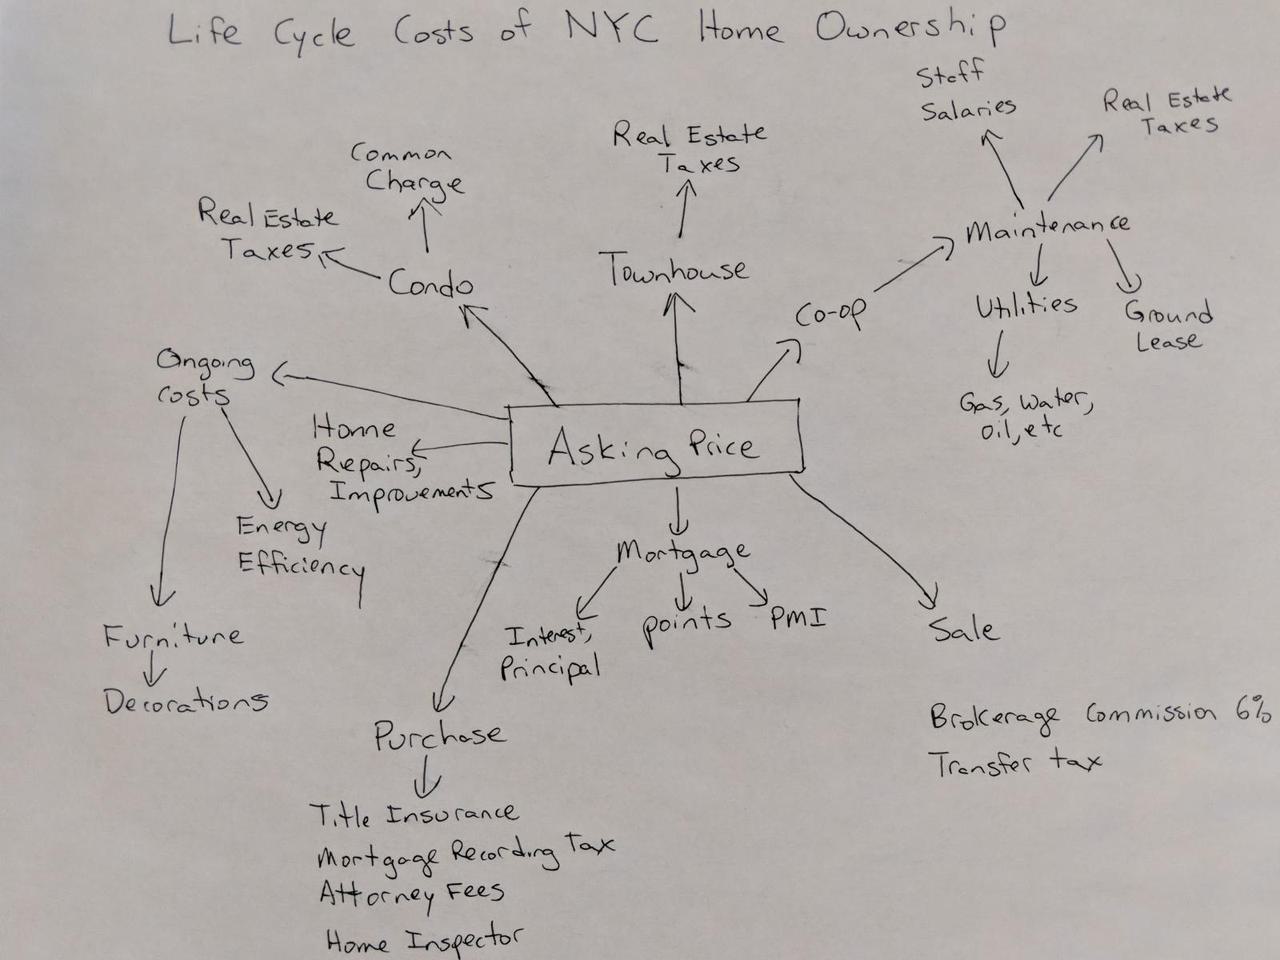 web of ideas starting with "Asking Price" and linking out to all components of apartment buying process.